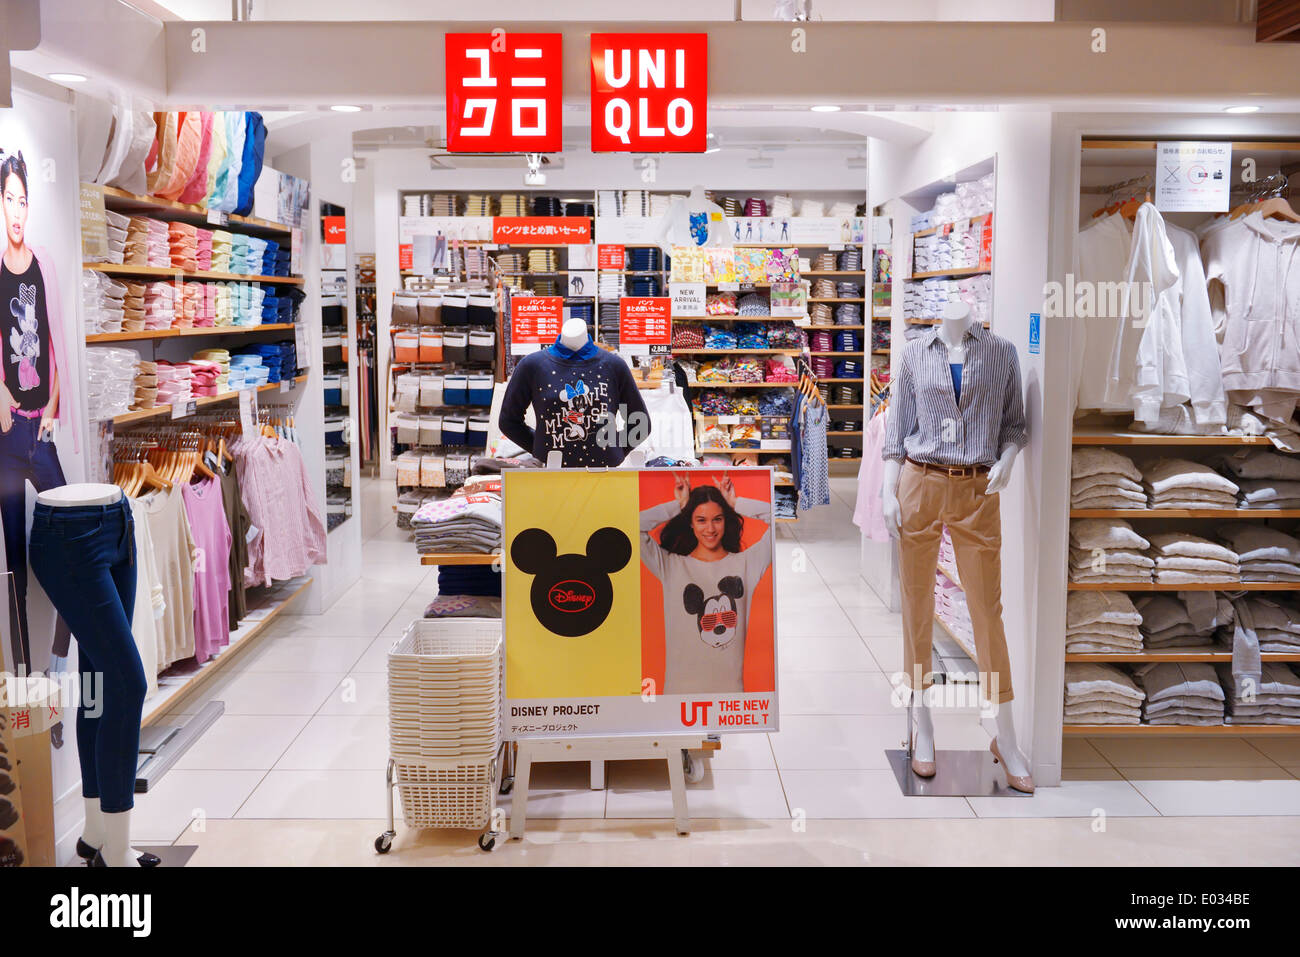 Uniqlo clothing store in Tokyo, Japan Stock Photo - Alamy